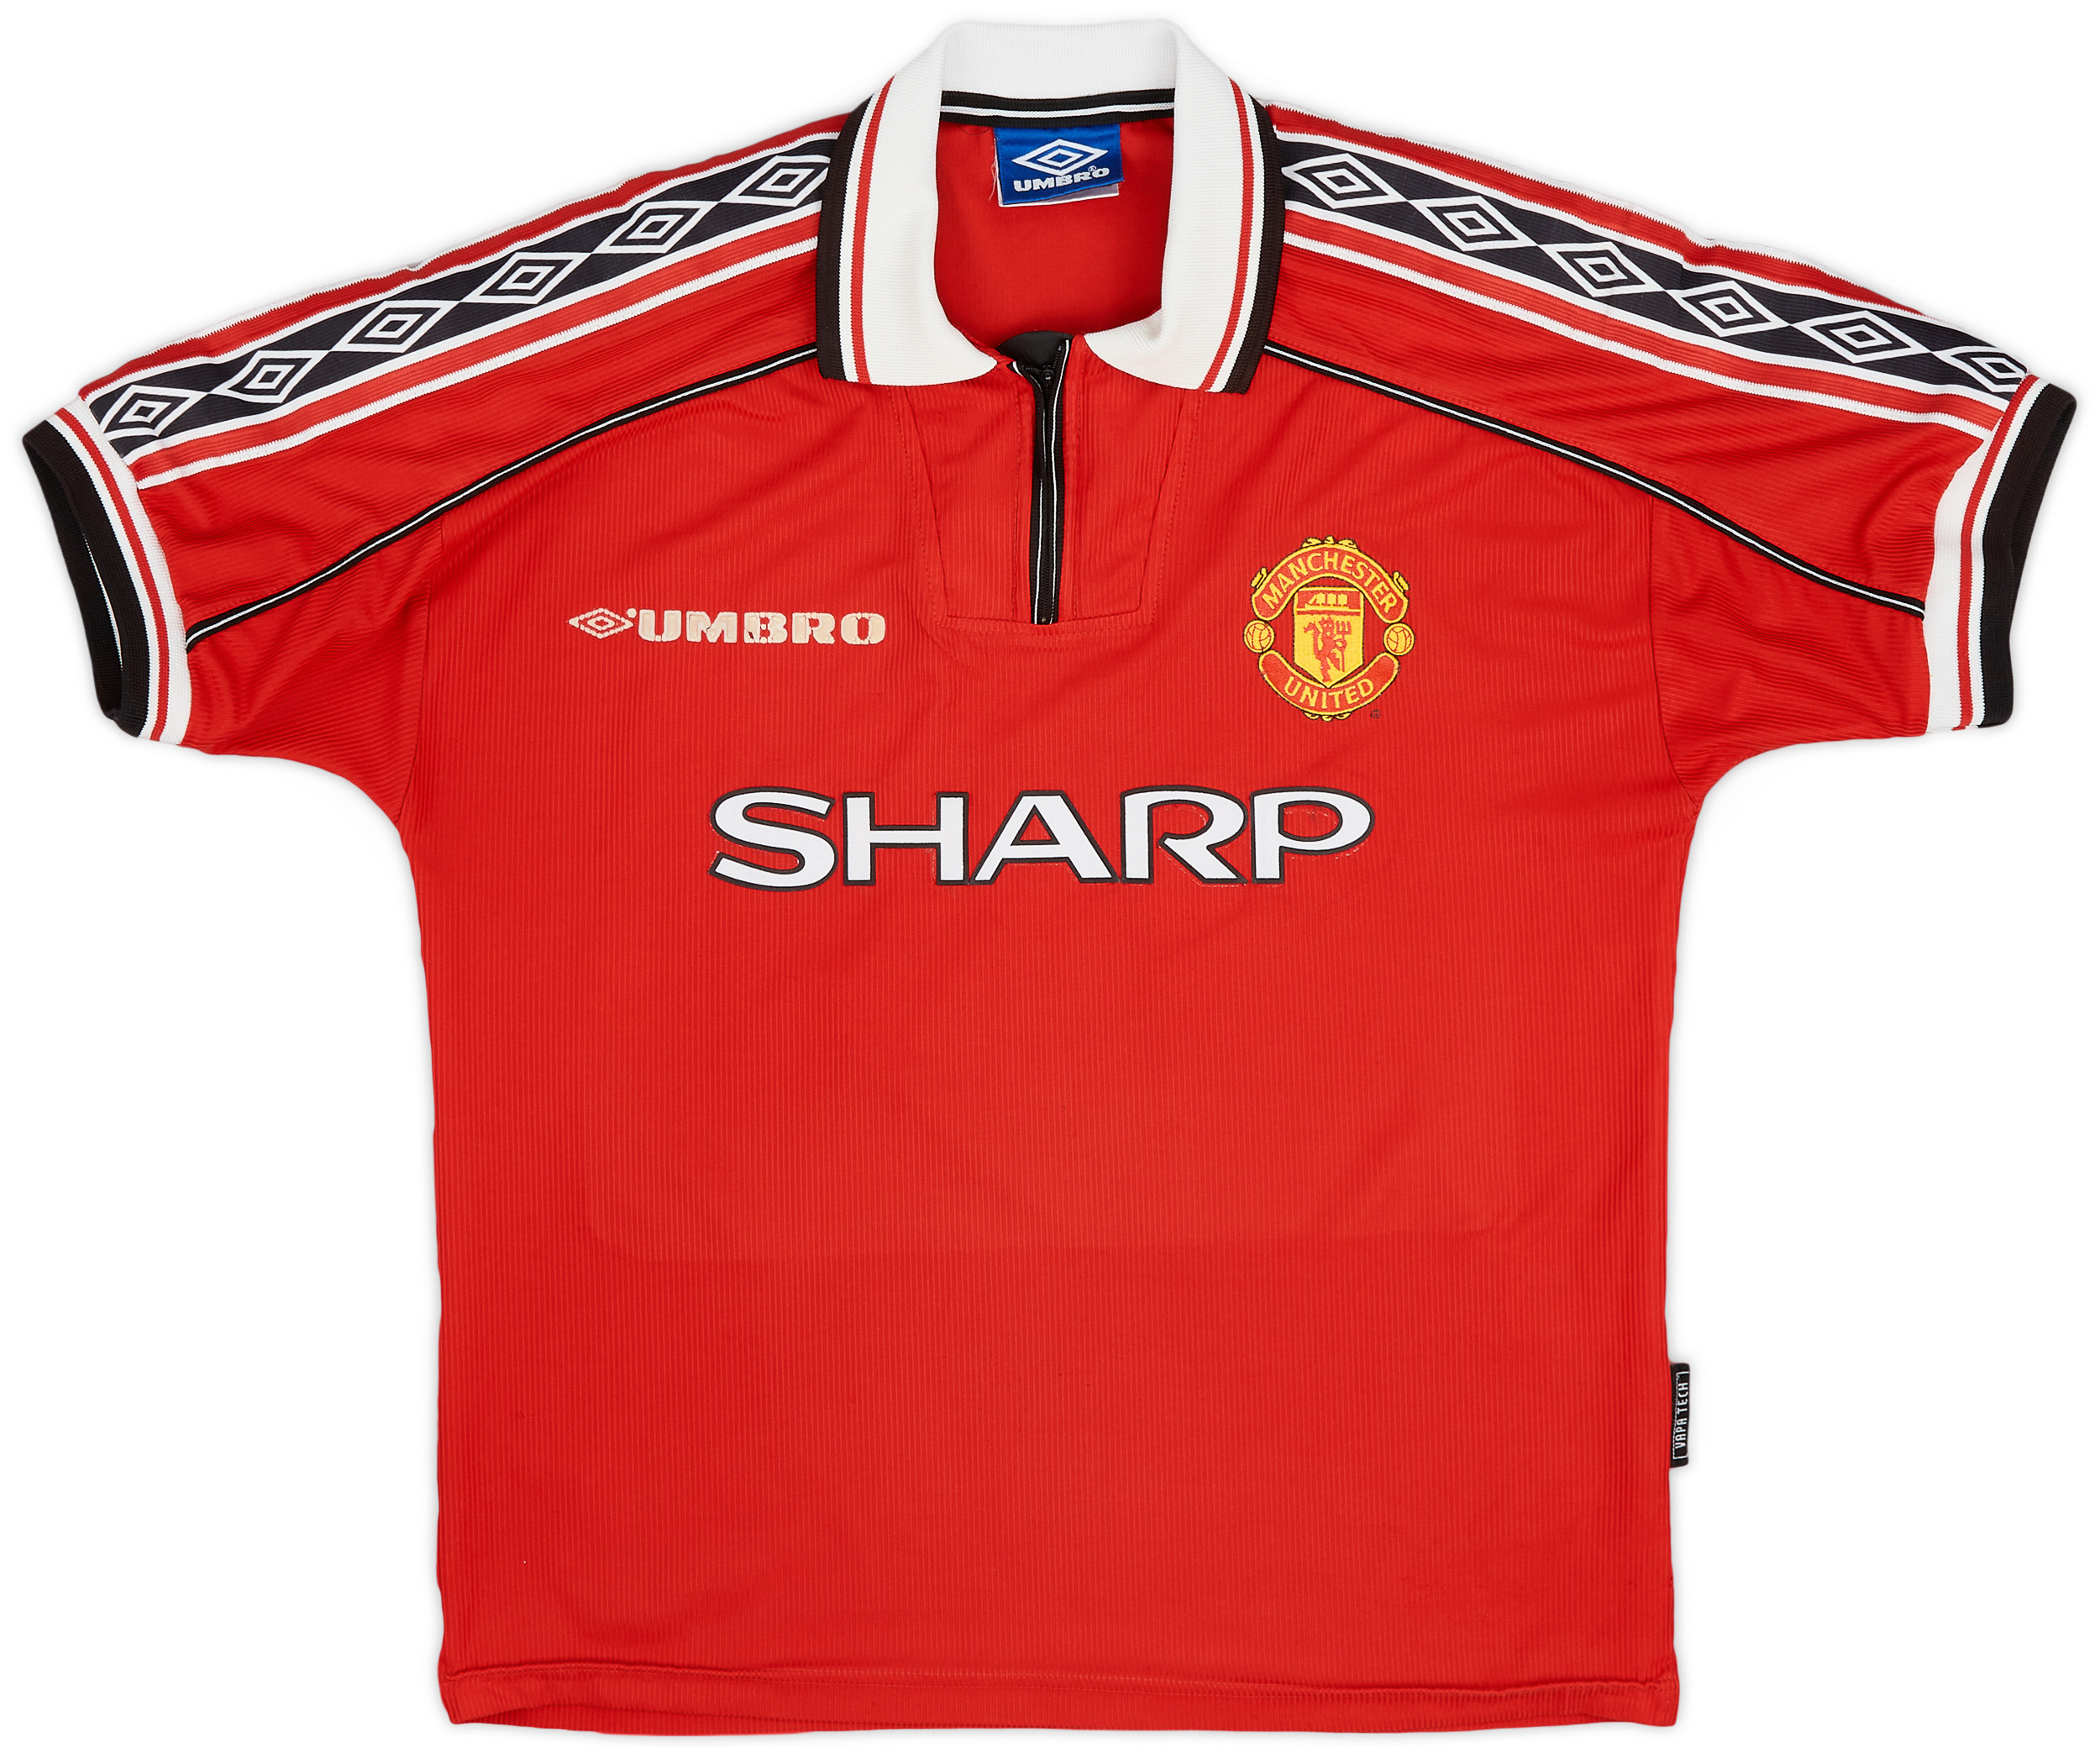 1998-00 Manchester United Home Shirt - 5/10 - ()